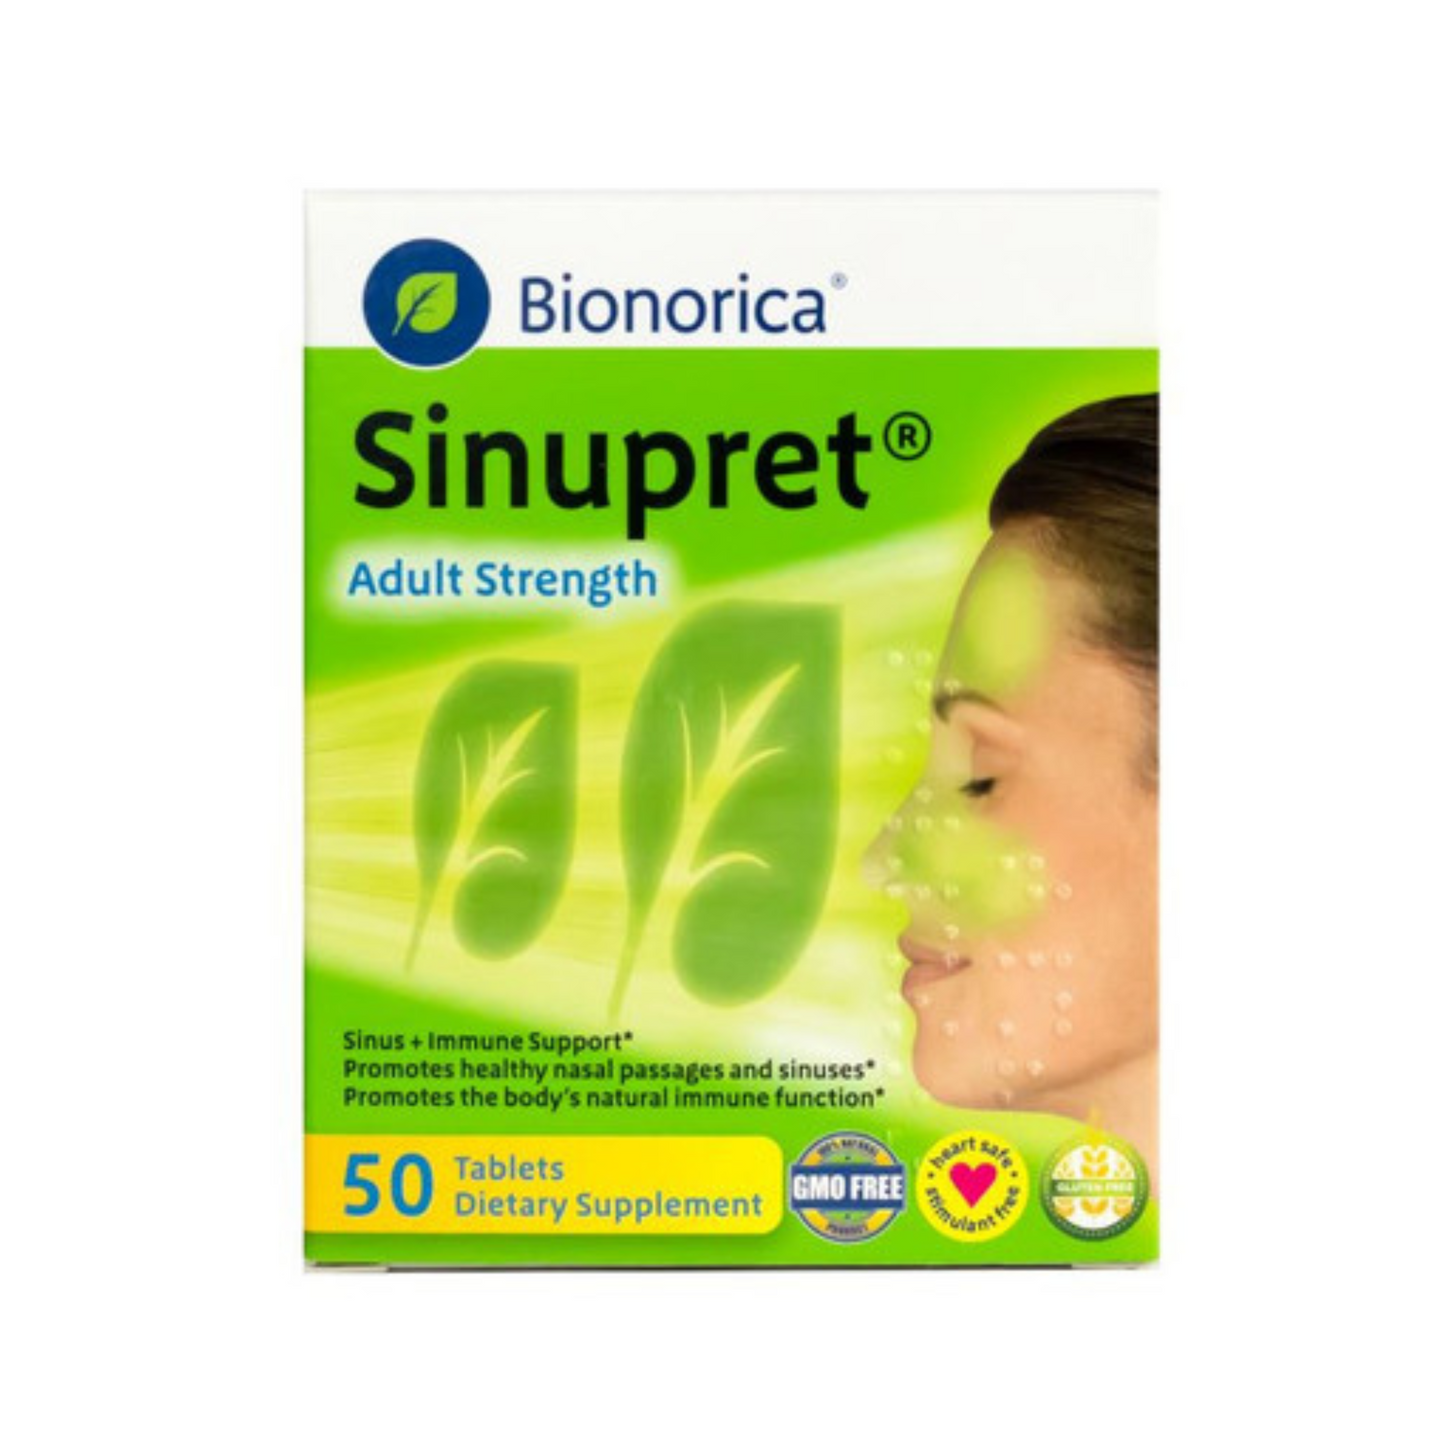 Primary Image of Bionorica Sinupret Adult Strength Sinus Tablets (50 count) 